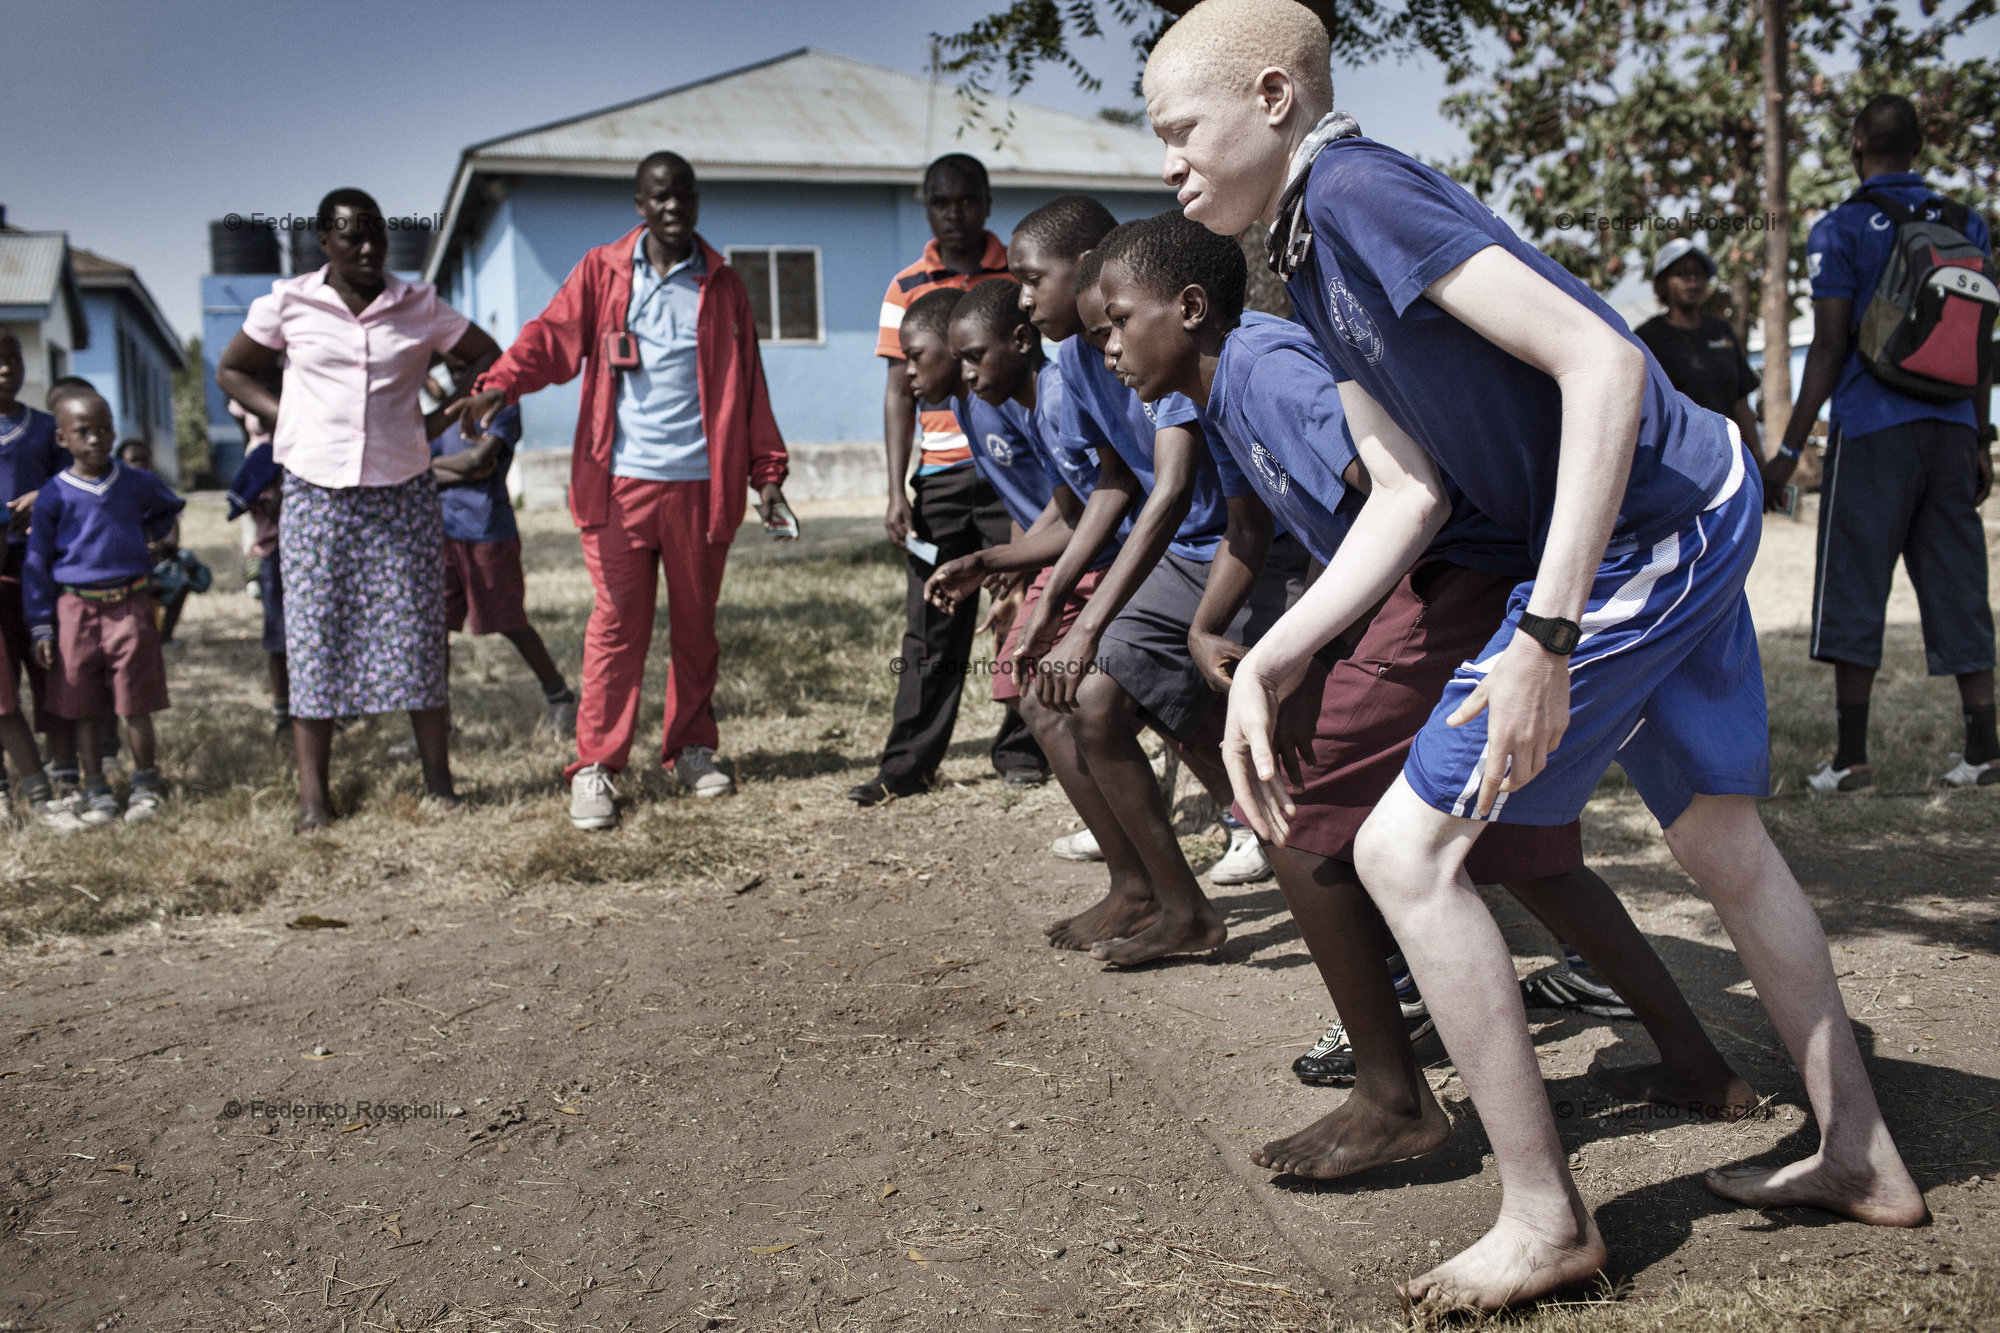 Mwanza, Tanzania, July 10, 2014 - Running race in sport day in Lake View School, Mwanza, Tanzania. In this school Under The Same Sun is full guarantee for 52 children with albinism, this allow them to study in a normal mixed school instead of special centers. In Tanzania albinos are considered disabled, but they just might have sight problems.